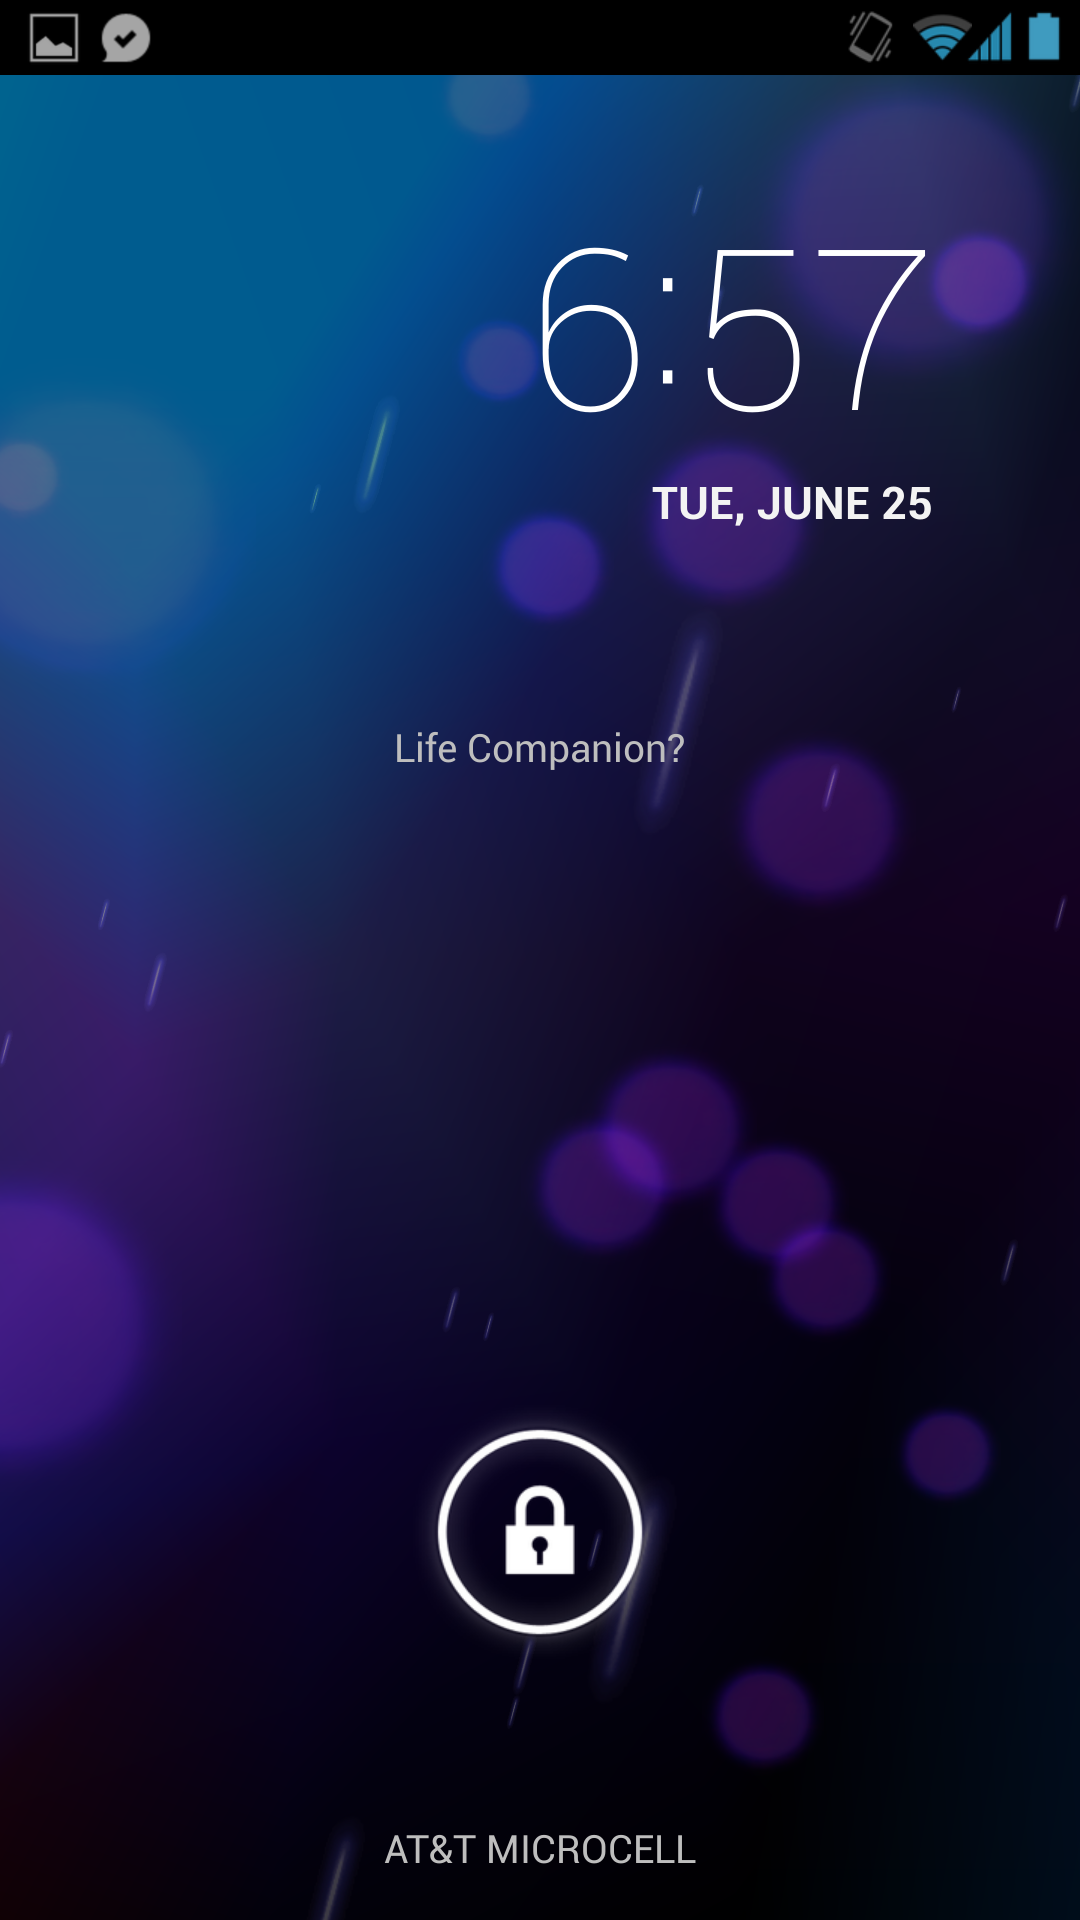 Samsung Galaxy S4 Lock Screen Wallpaper The Stock With